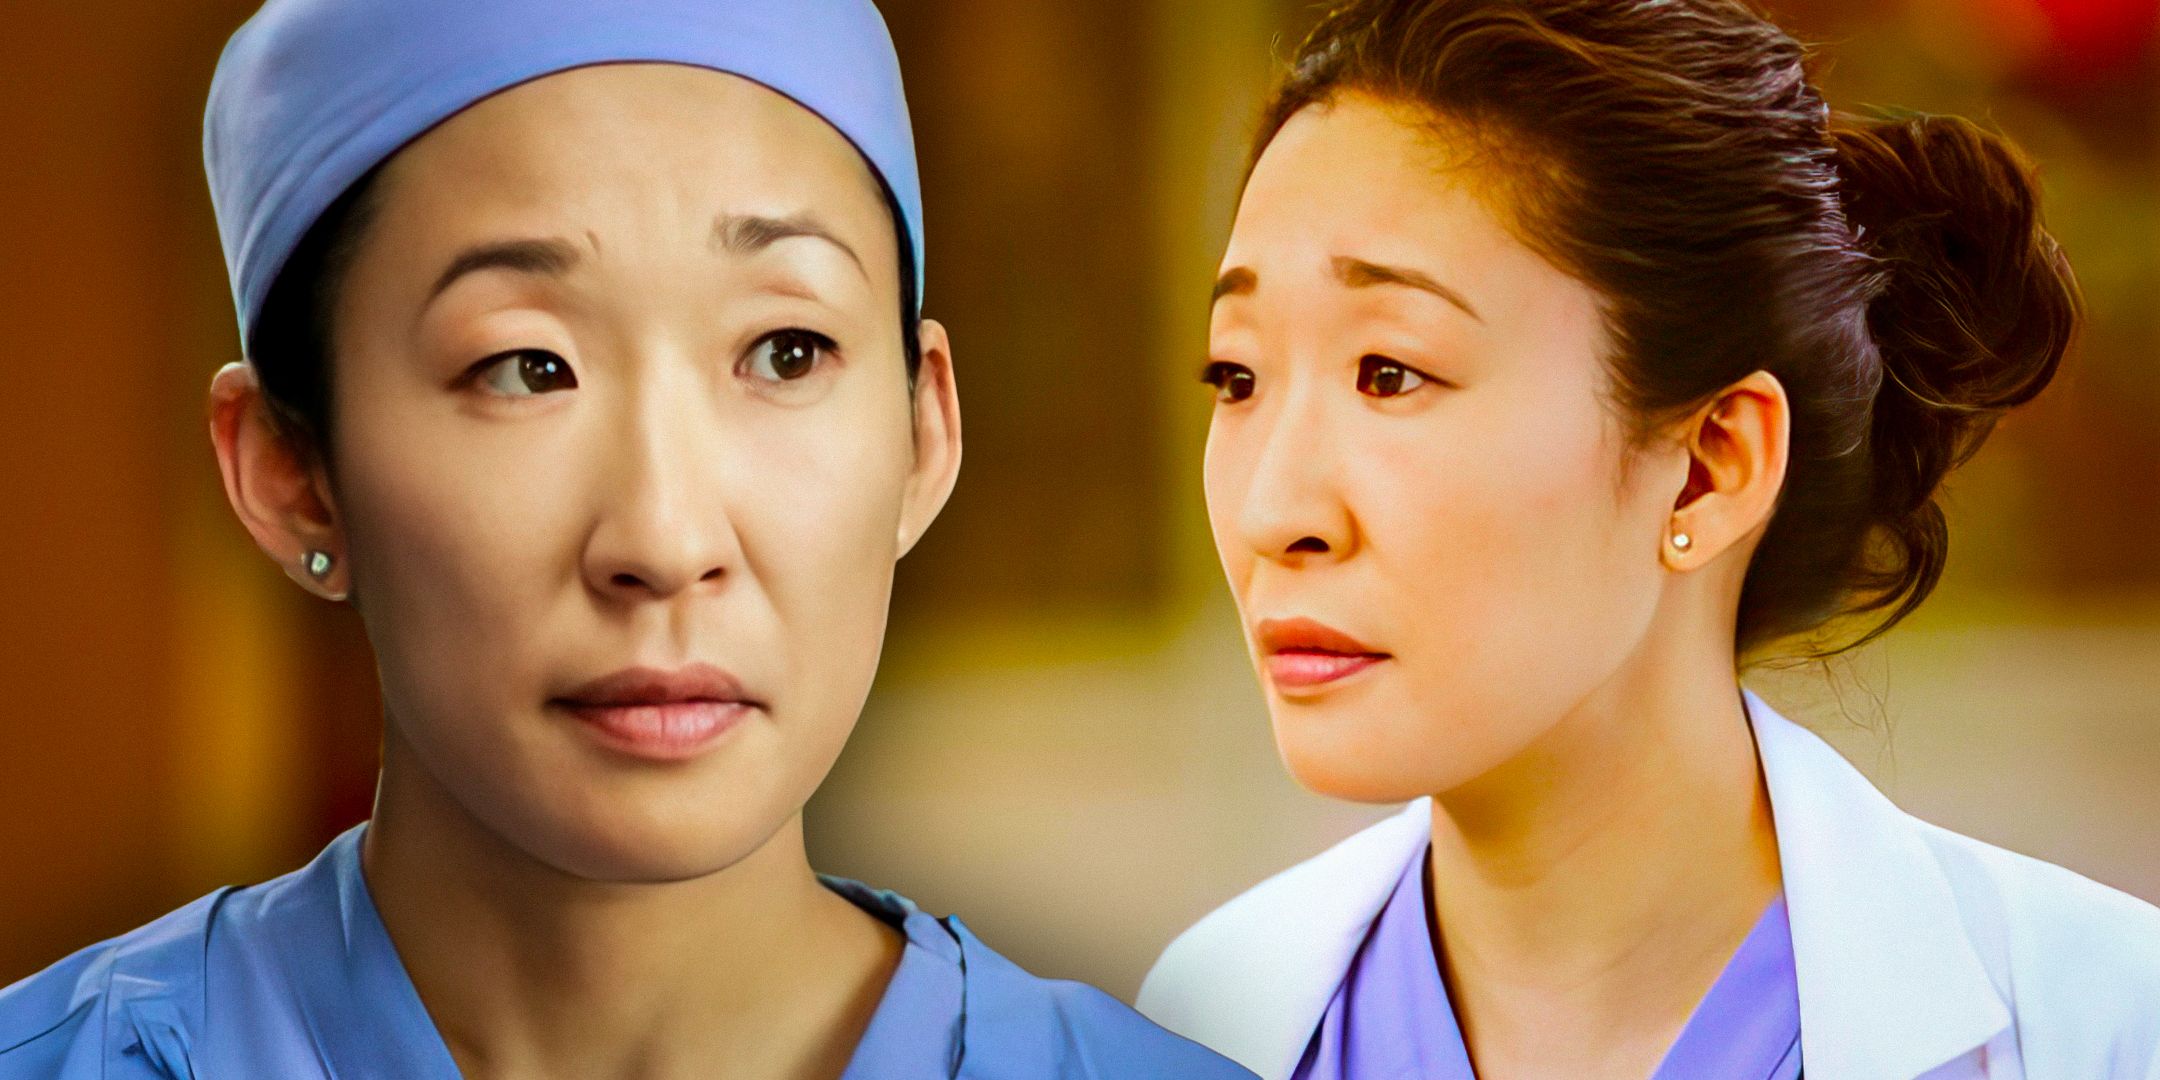 Greys Anatomy Has Finally Found Its Cristina Yang Replacement After 10 Years